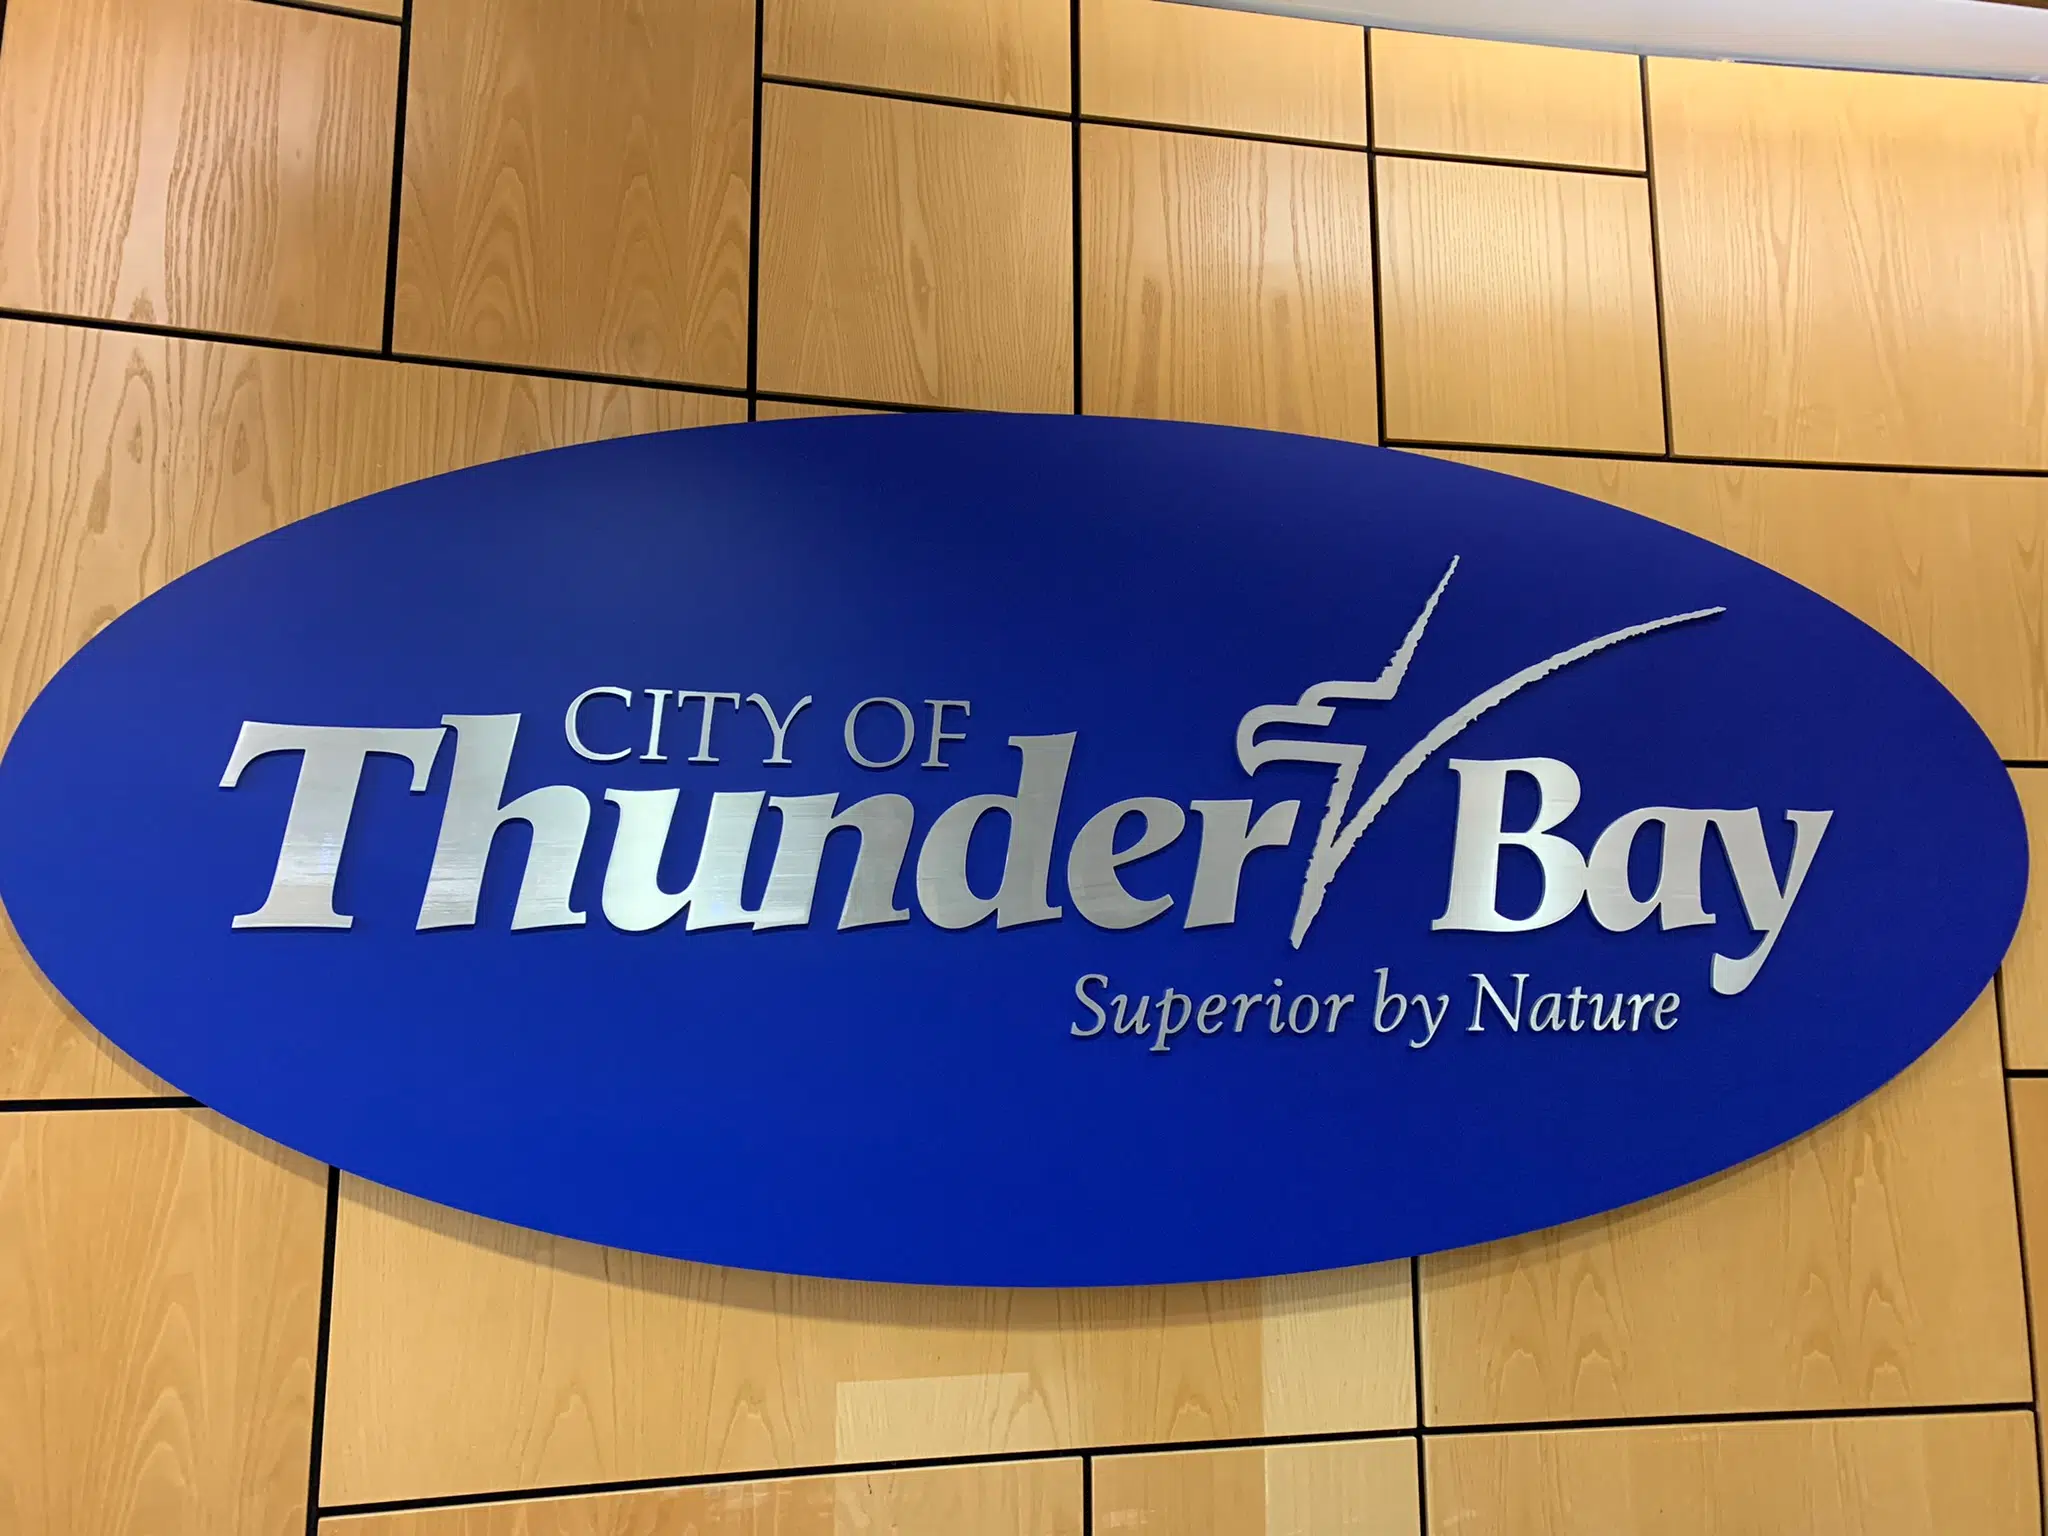 Culture Days returning to Thunder bay